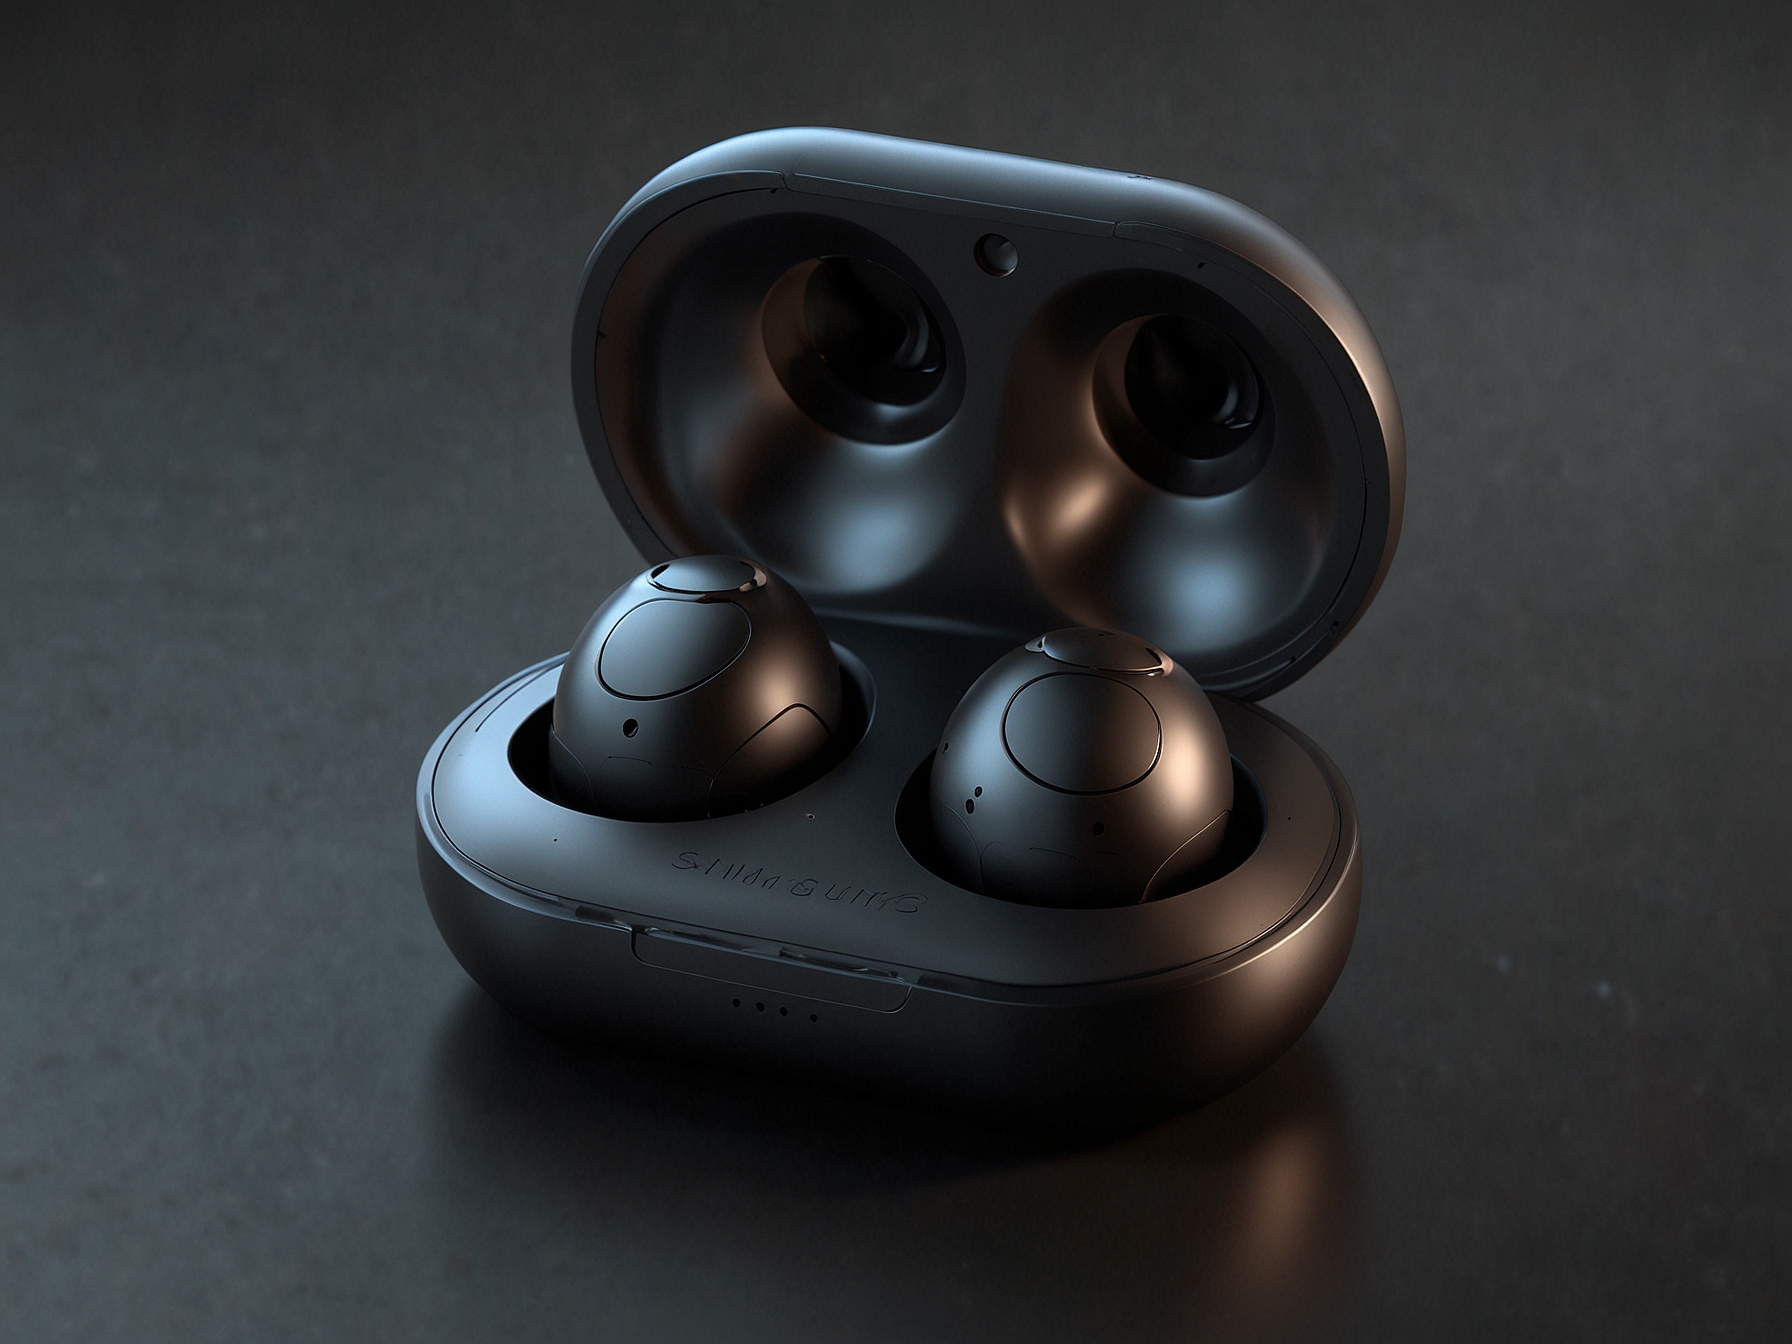 A close-up image of the Samsung Galaxy Buds 3 highlighting their new stem design with sleek, rounded shapes, and ergonomic considerations that promise enhanced comfort and fit.